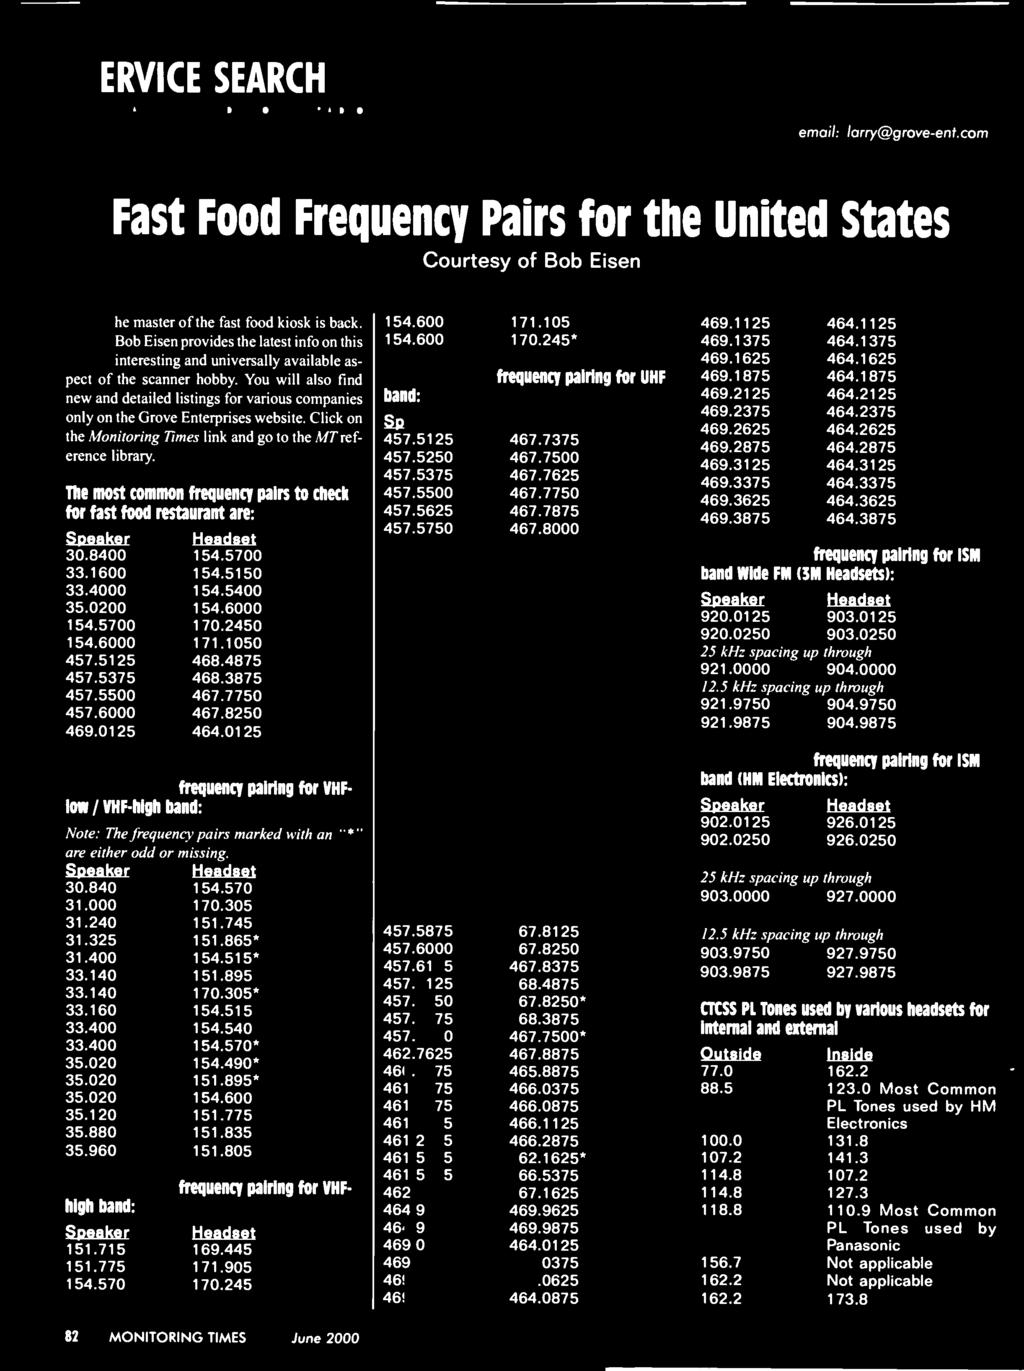 The most common frequency pairs to check for fast food restaurant are: Speaker Headset 30.8400 154.5700 33.1600 154.5150 33.4000 154.5400 35.0200 154.6000 154.5700 170.2450 154.6000 171.1050 457.